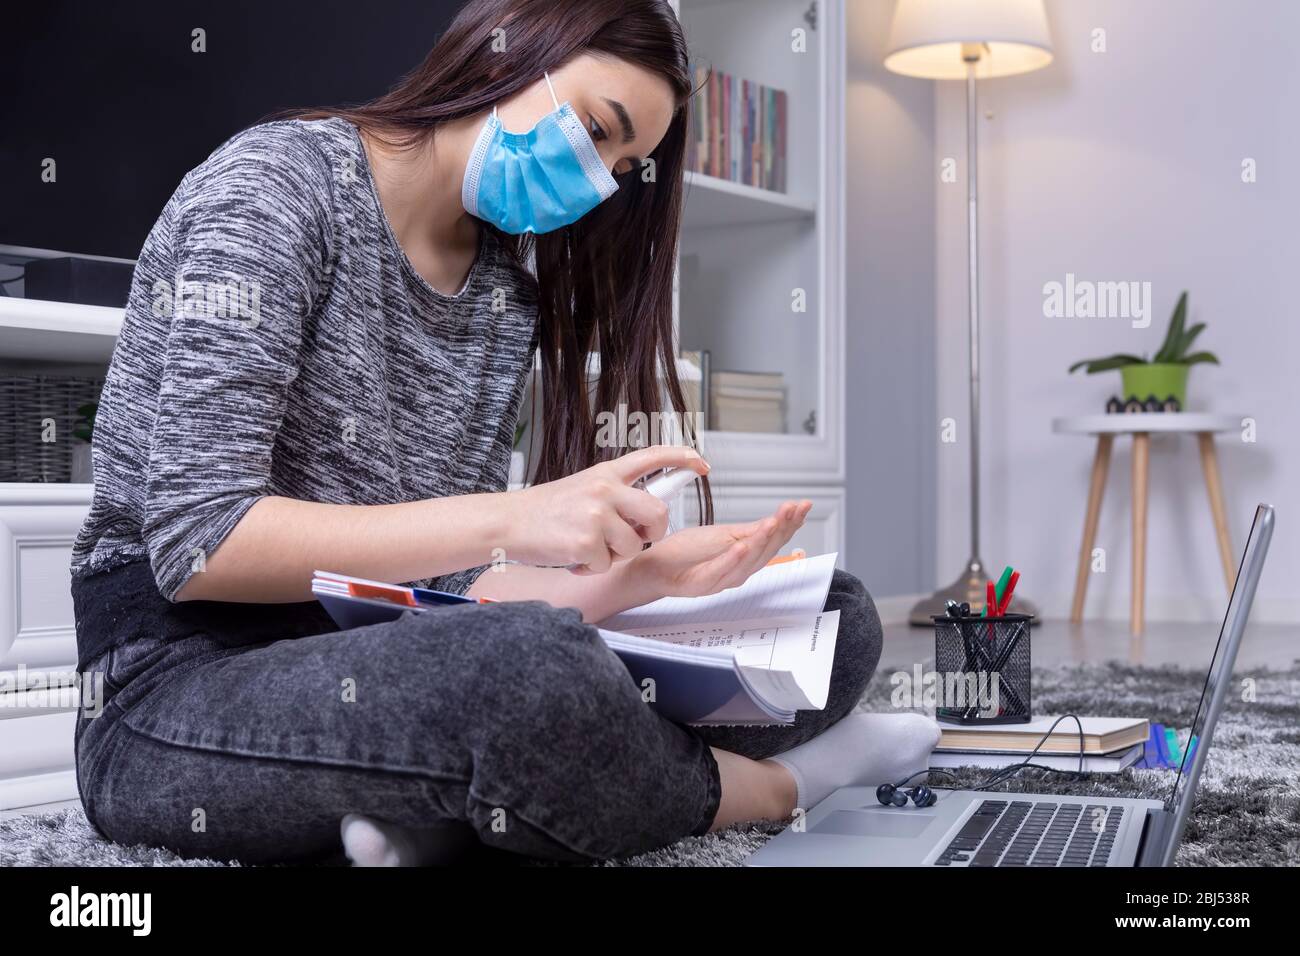 High school student girl with mask on her face using sanitizer before doing her homework. Online education during the coronavirus pandemic. Stock Photo